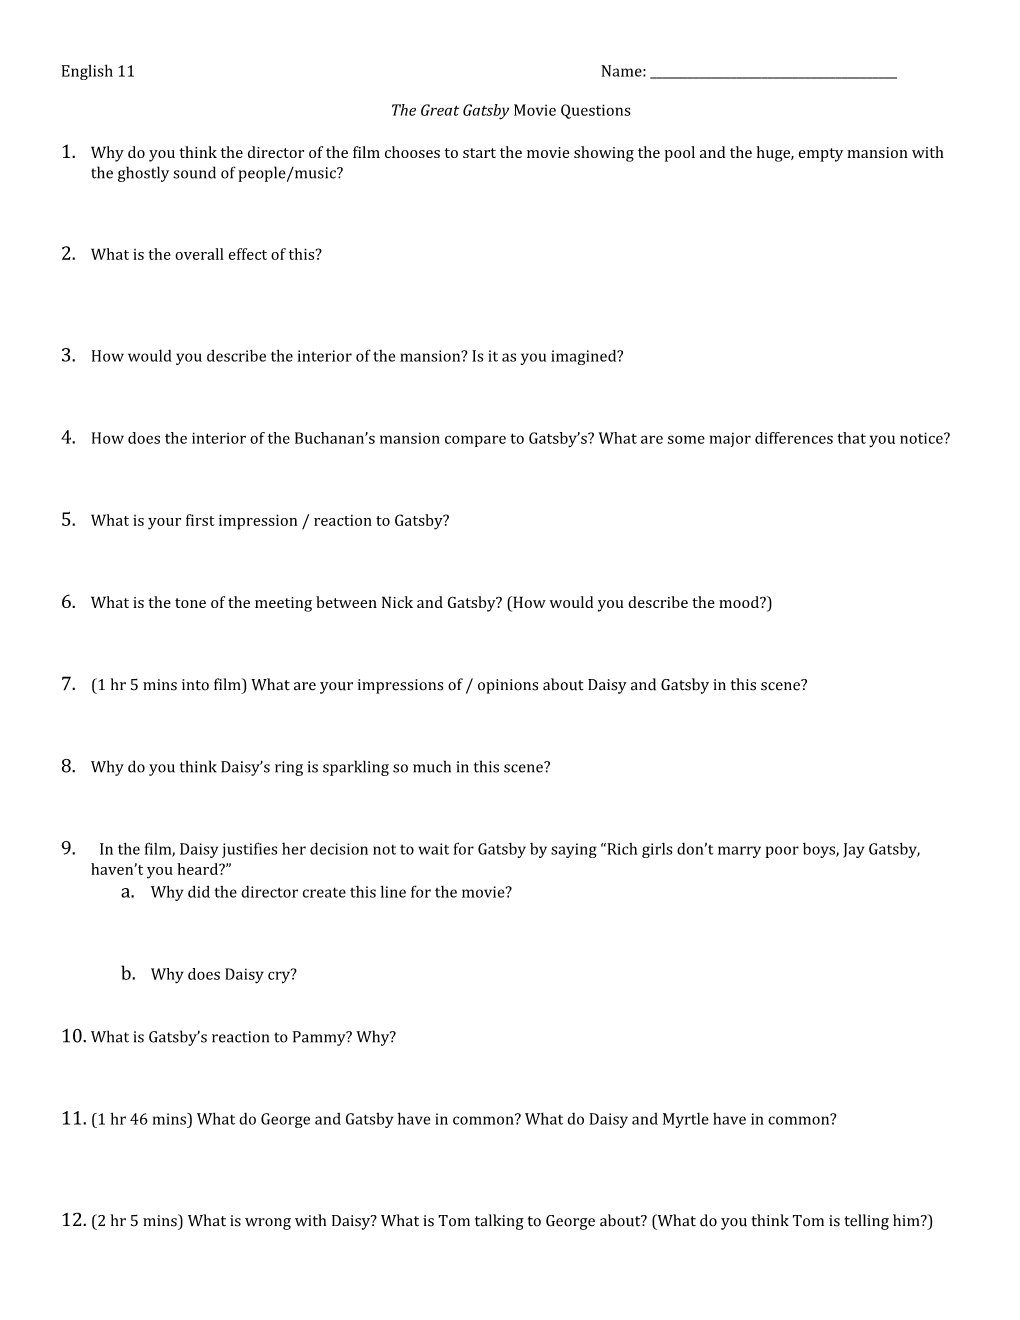 The Great Gatsby Movie Questions